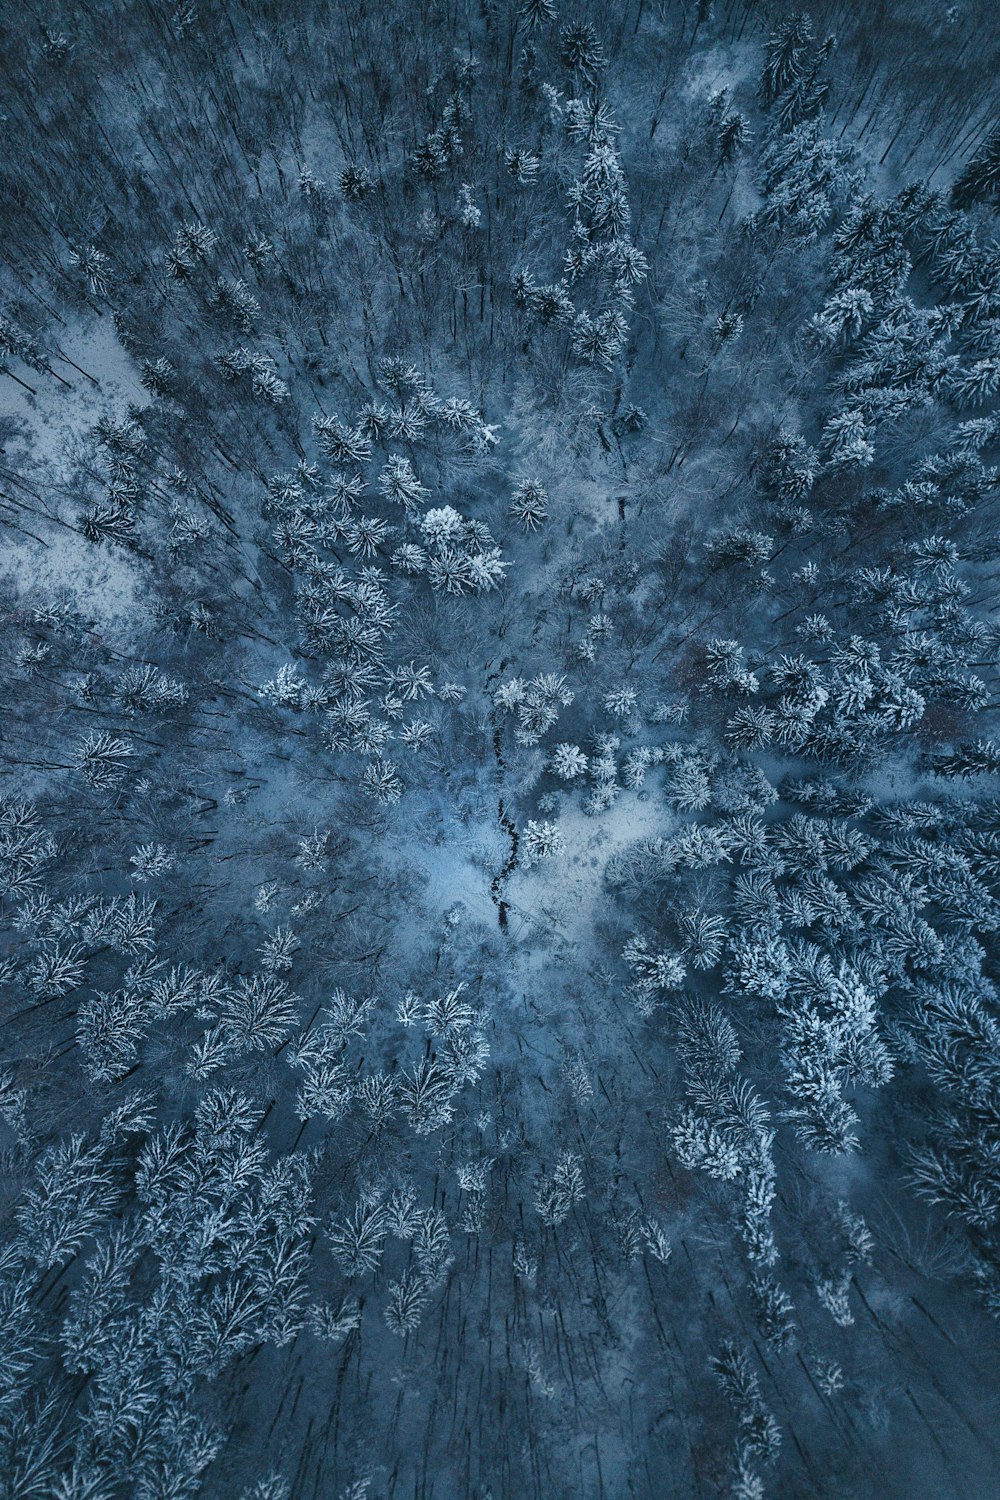 birds eye view of snow covered trees